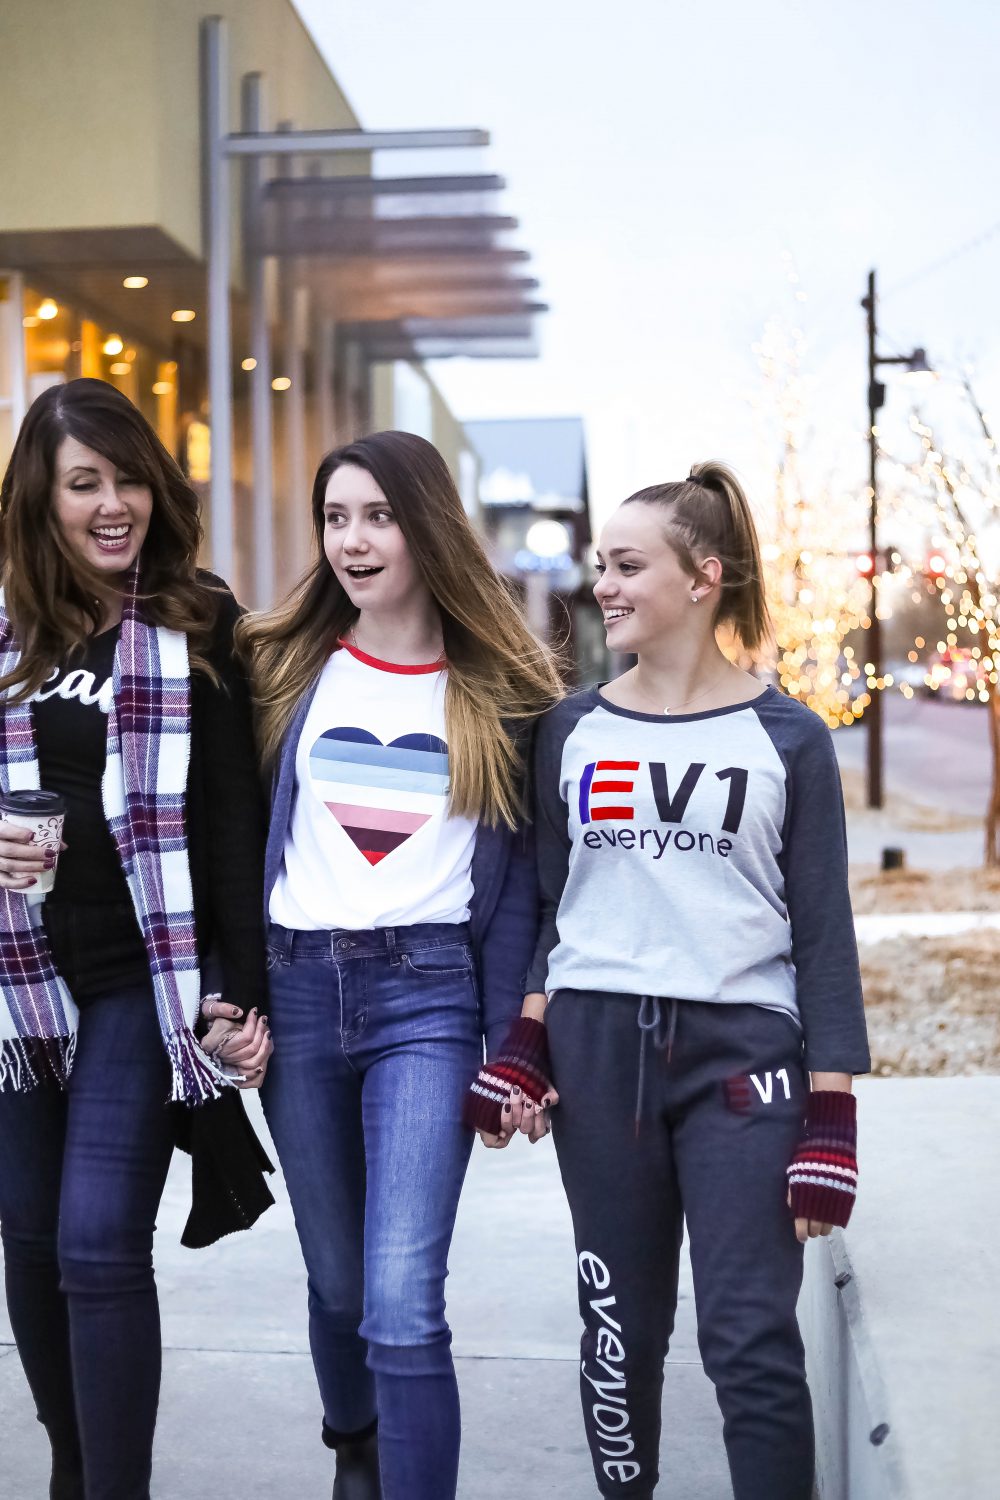 Ellen Degeneres and Walmart have partnered in EV1, a line of high-quality, affordable, stylish clothing for every woman. I am sharing some of our favorite items from the EV1 line. 